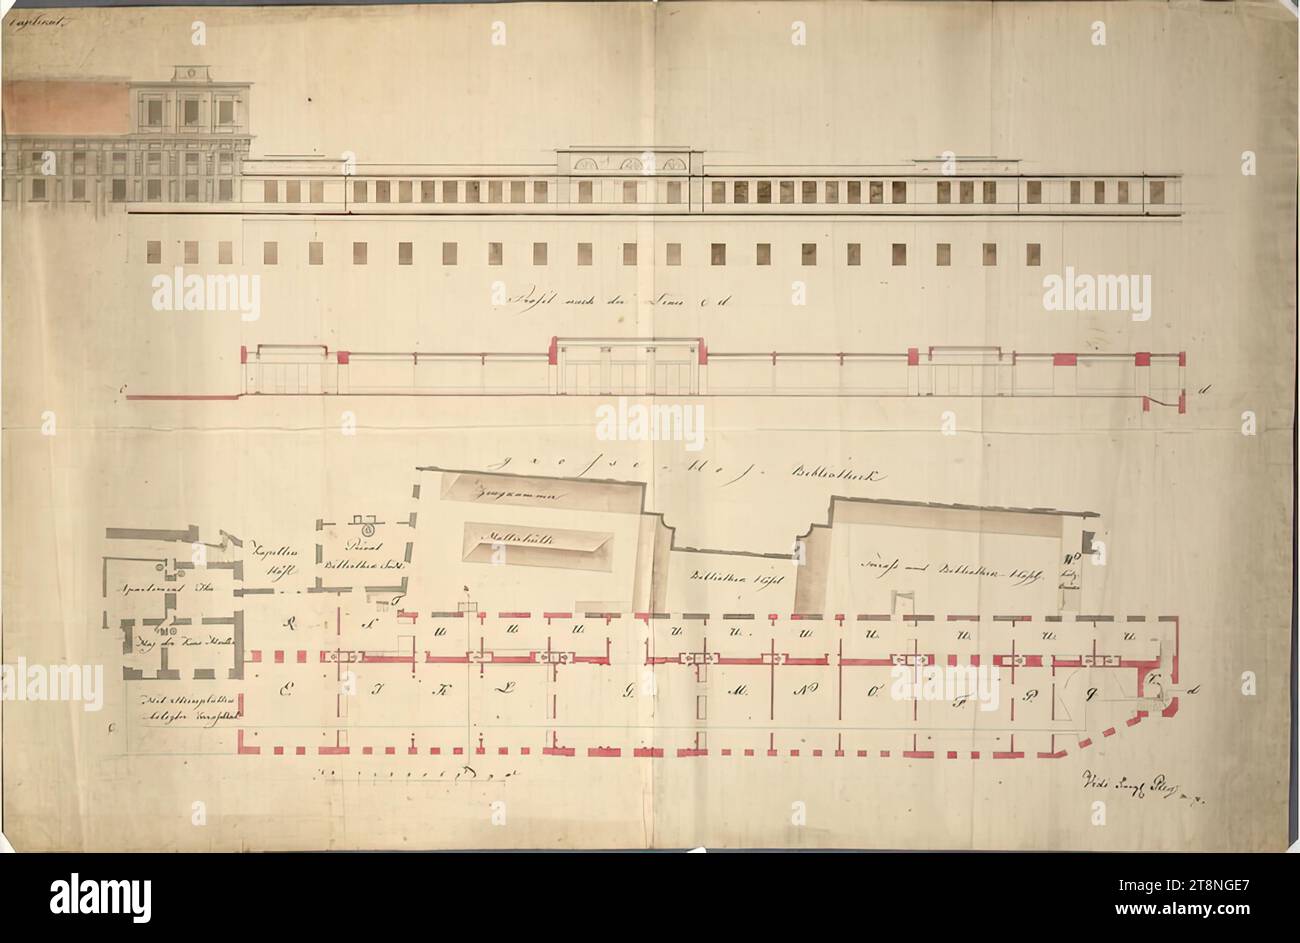 Vienna I, Hofburg, Augustinergang wing, glass house above the Augustinergang, ground plan and section, 1837, plan, graphite (preliminary drawing); pen in black; pink, gray and brown wash, sheet: 56.7 x 86.3 cm, recto: 'Duplicate.'; 'vidi Frey Pley m.p.'; Room inscriptions verso: '509/837'; 'III/2. Kl Stock Photo